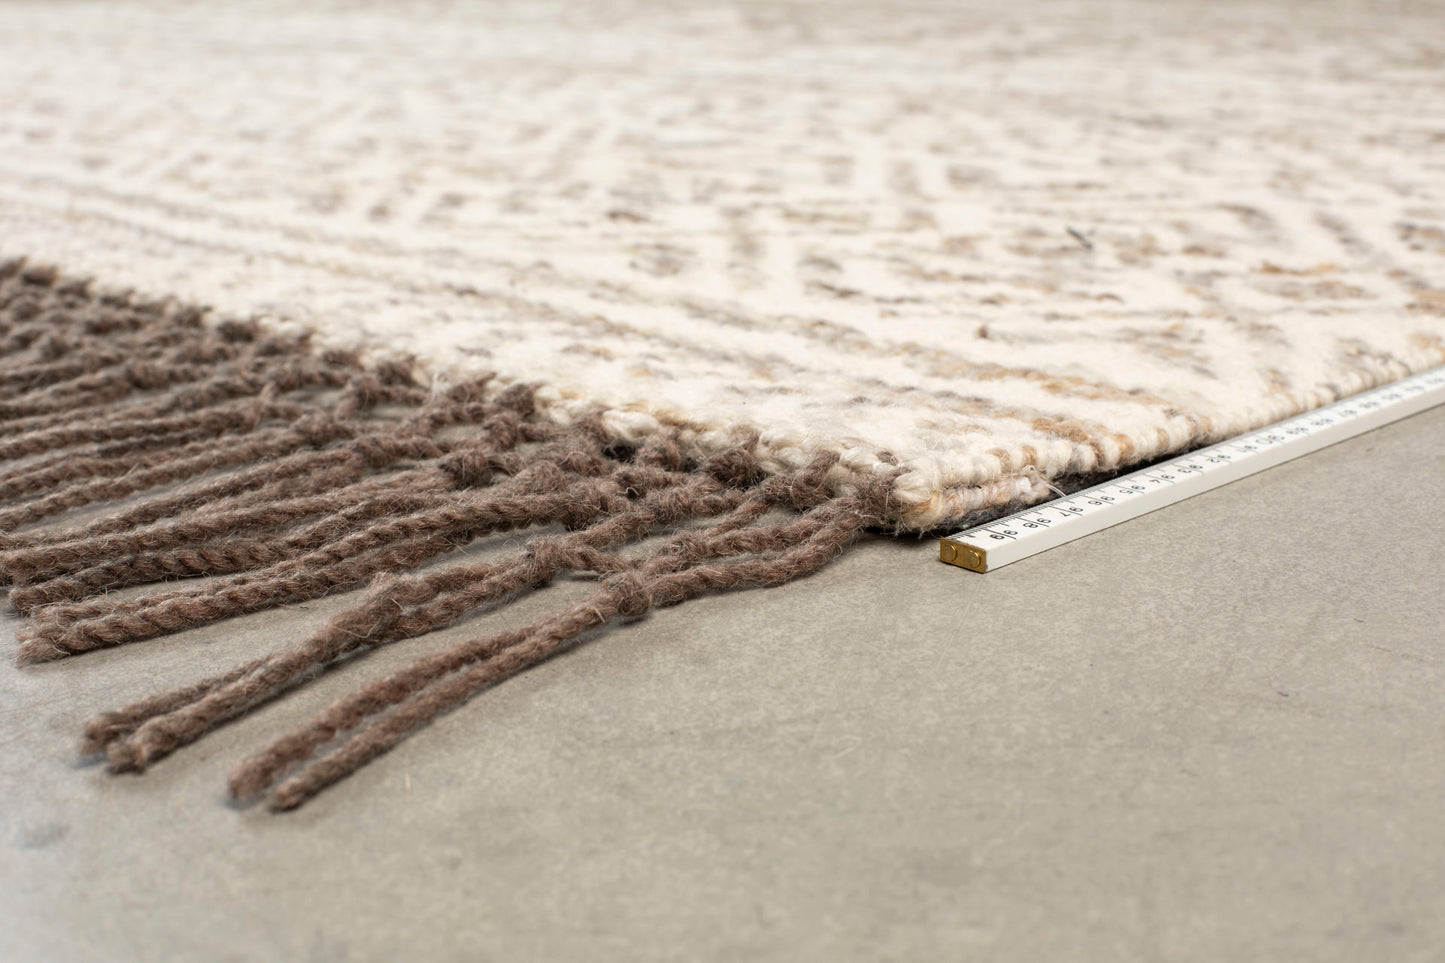 Nancy's Sweet Home Carpet - Classic - Taupe - Wool, Polyester, Cotton - 170 cm x 240 cm x cm